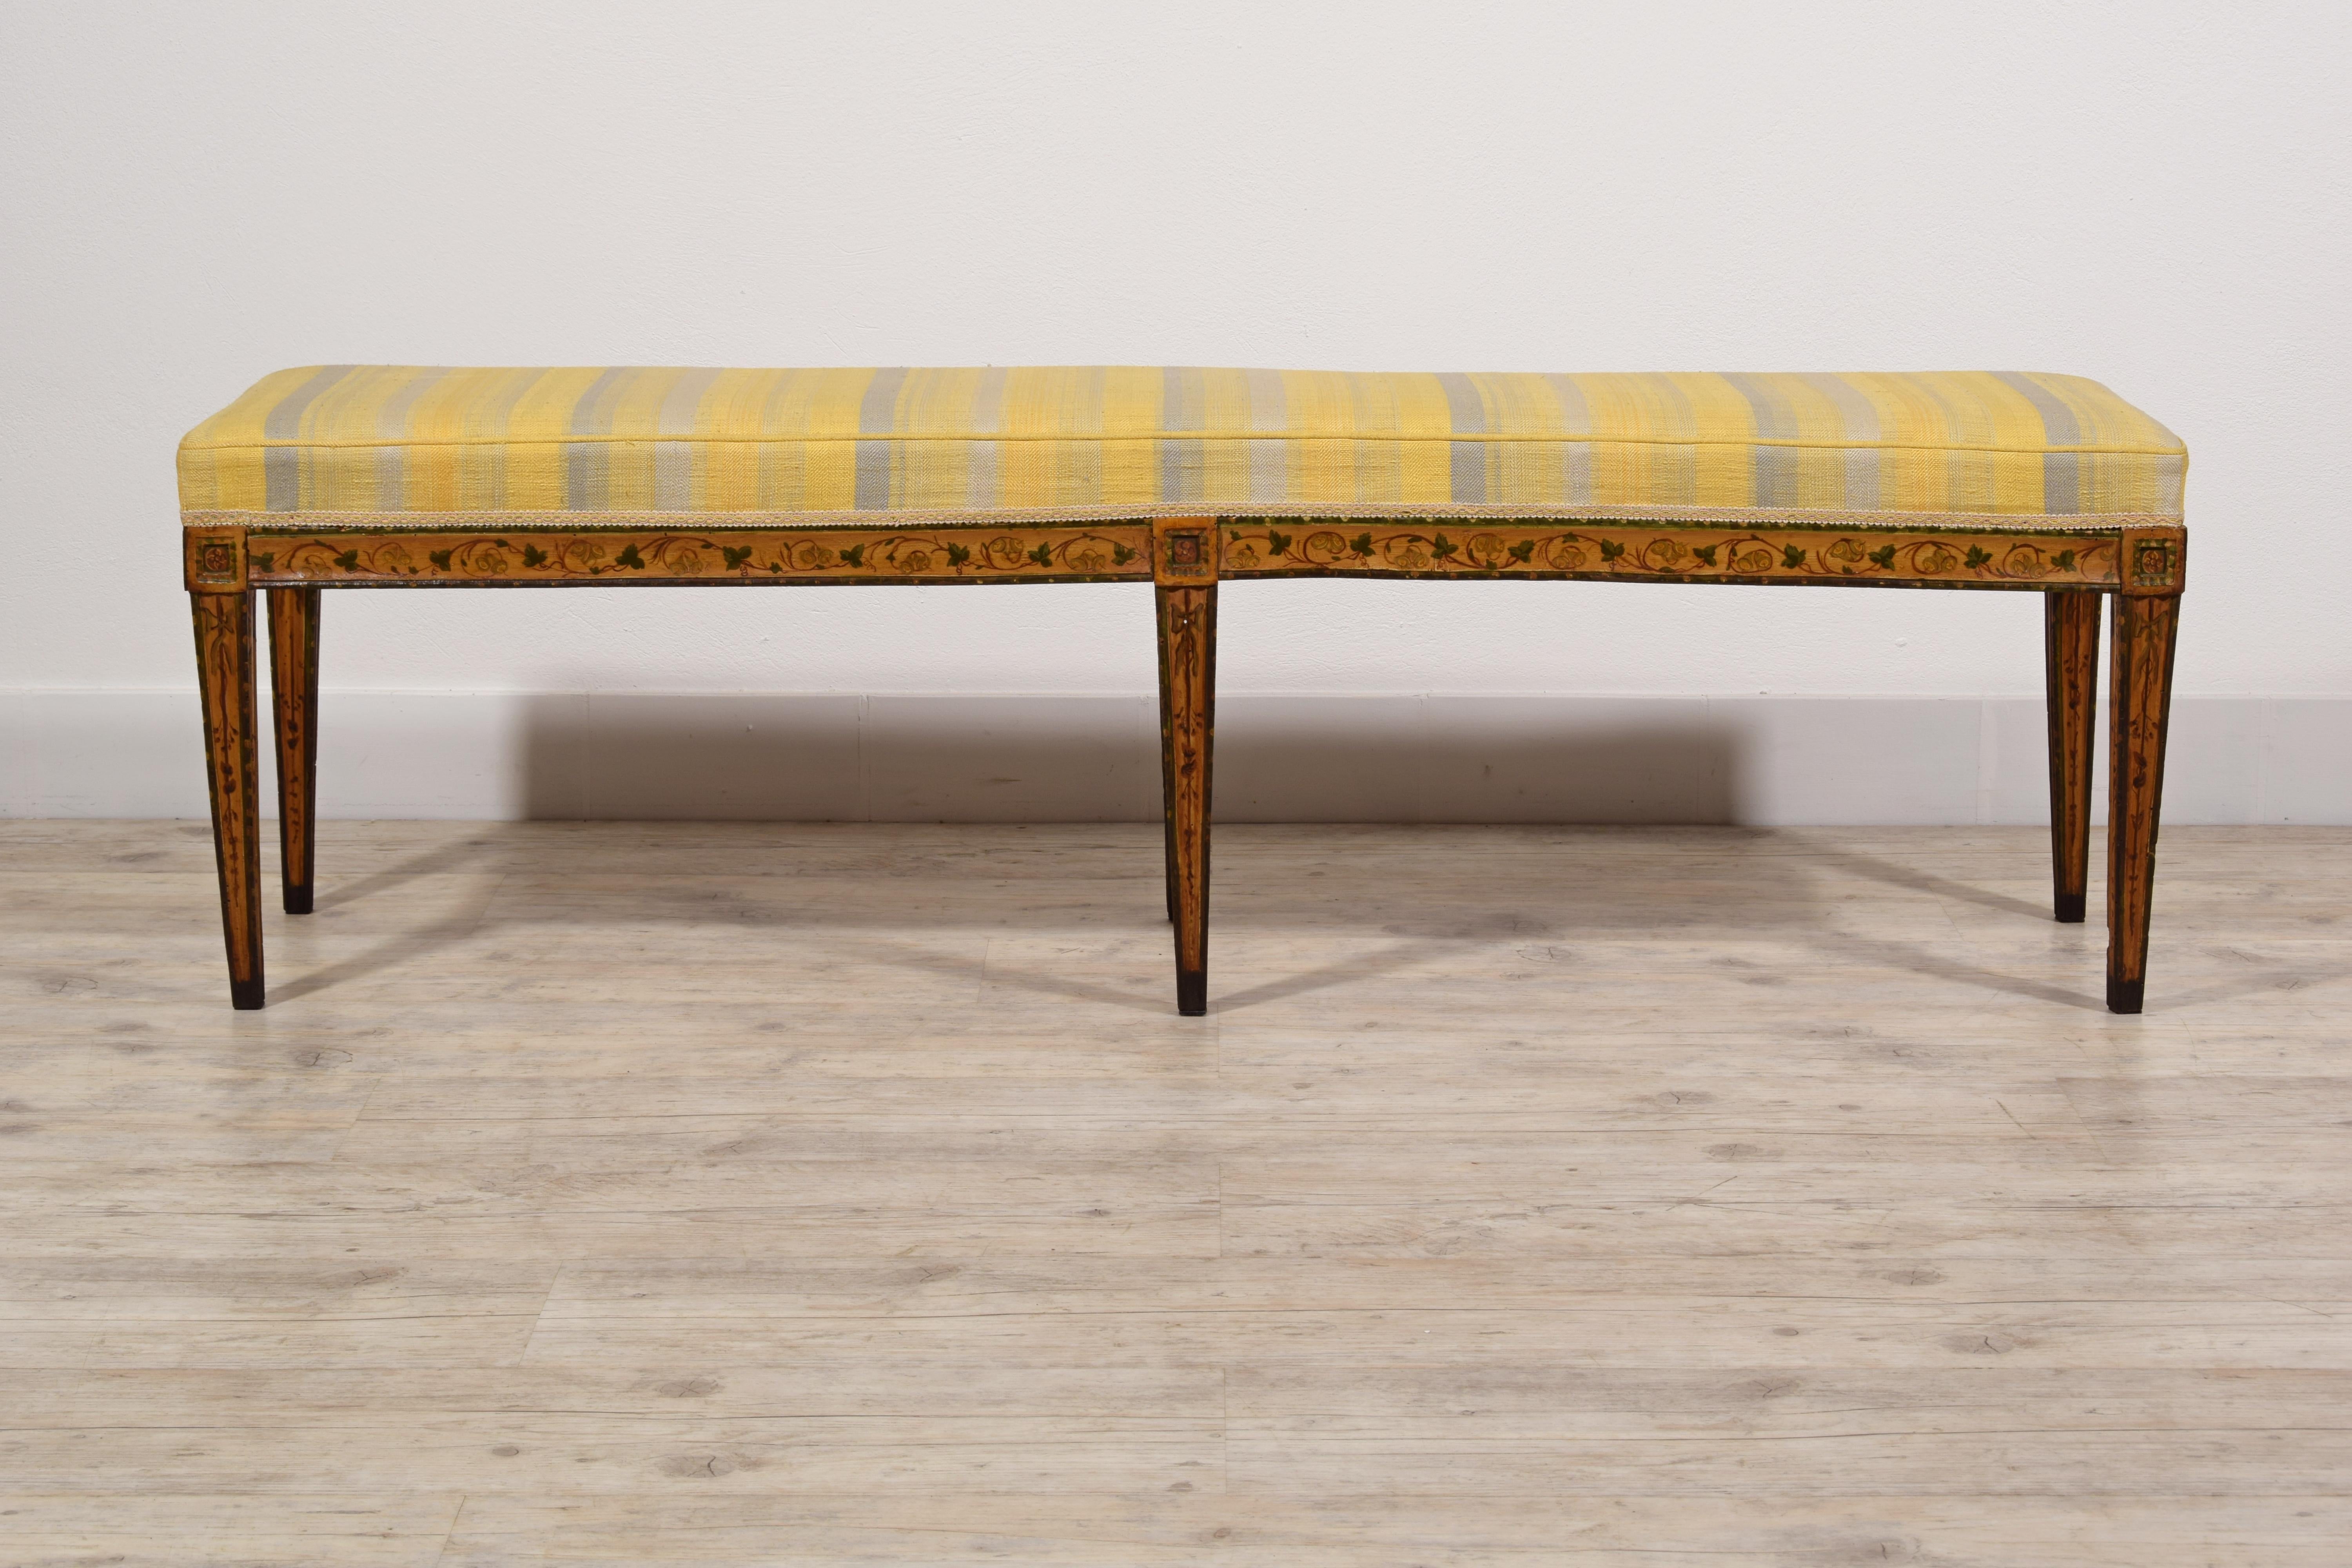 19th Century, Italian Six-legged Centre Bench Lacquered Wood with Ramage Motive 10